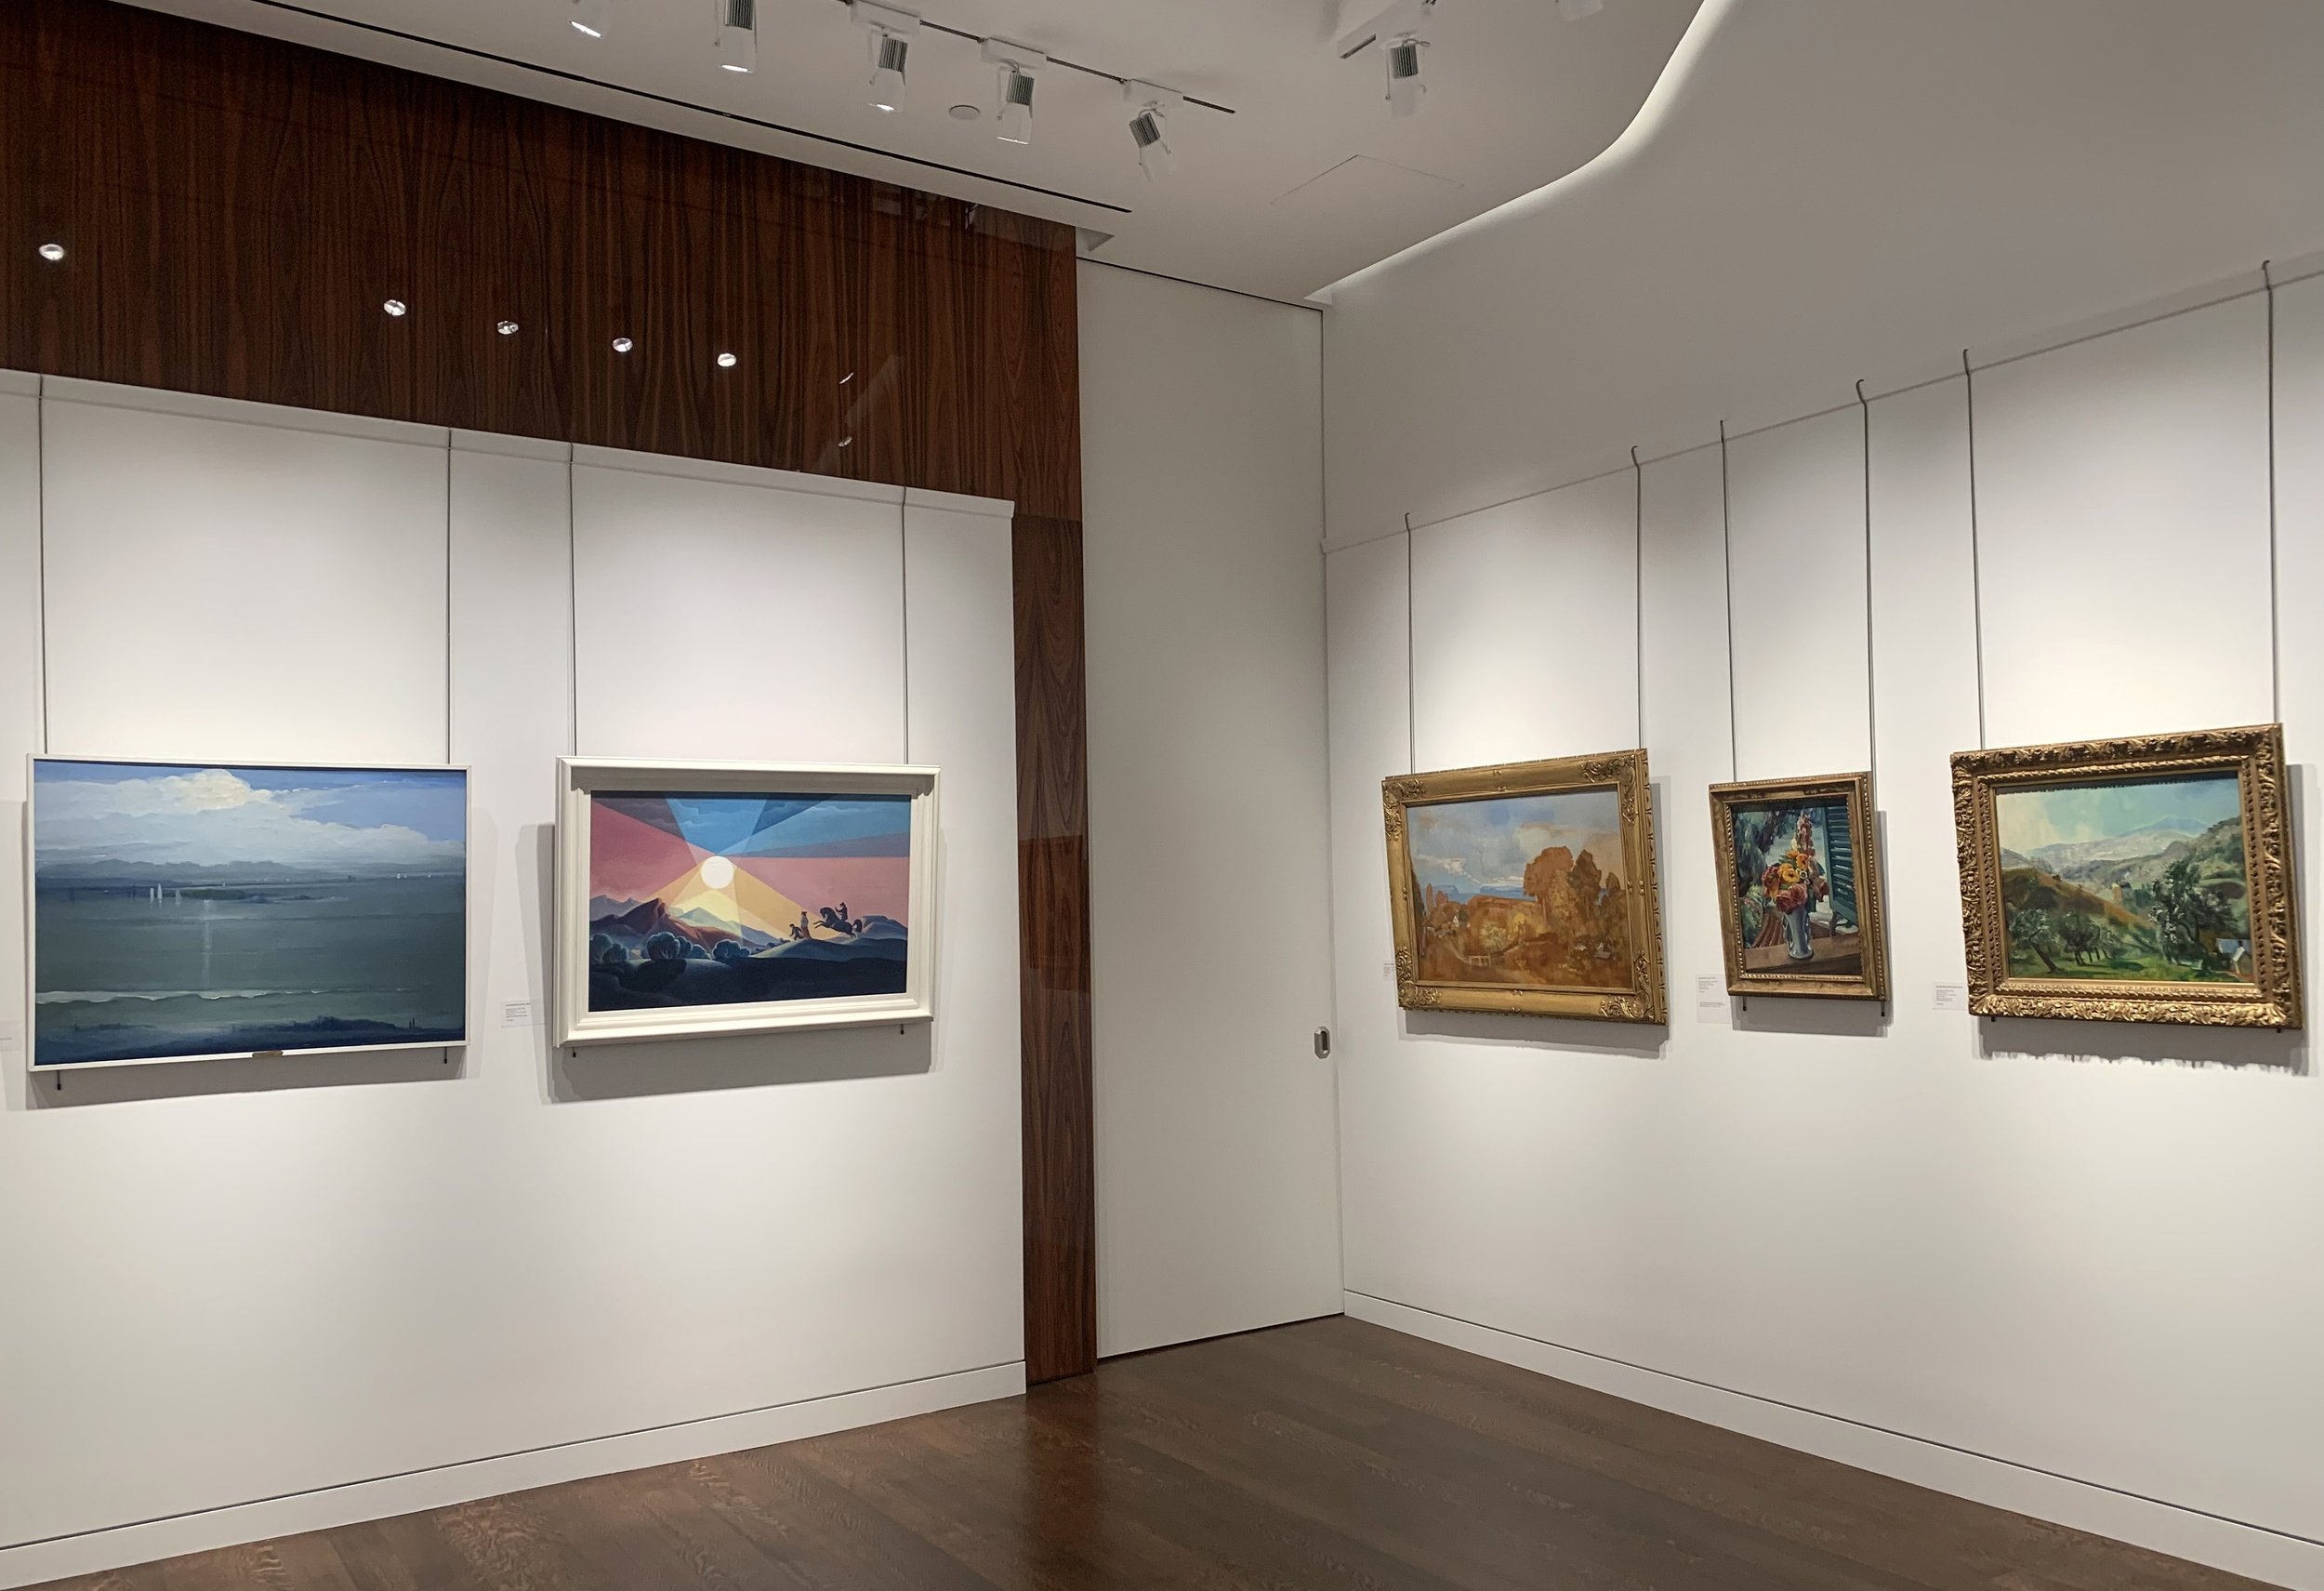  REALISM TO THE EDGE OF ABSTRACTION Sept 12 - Nov 27, 2019 